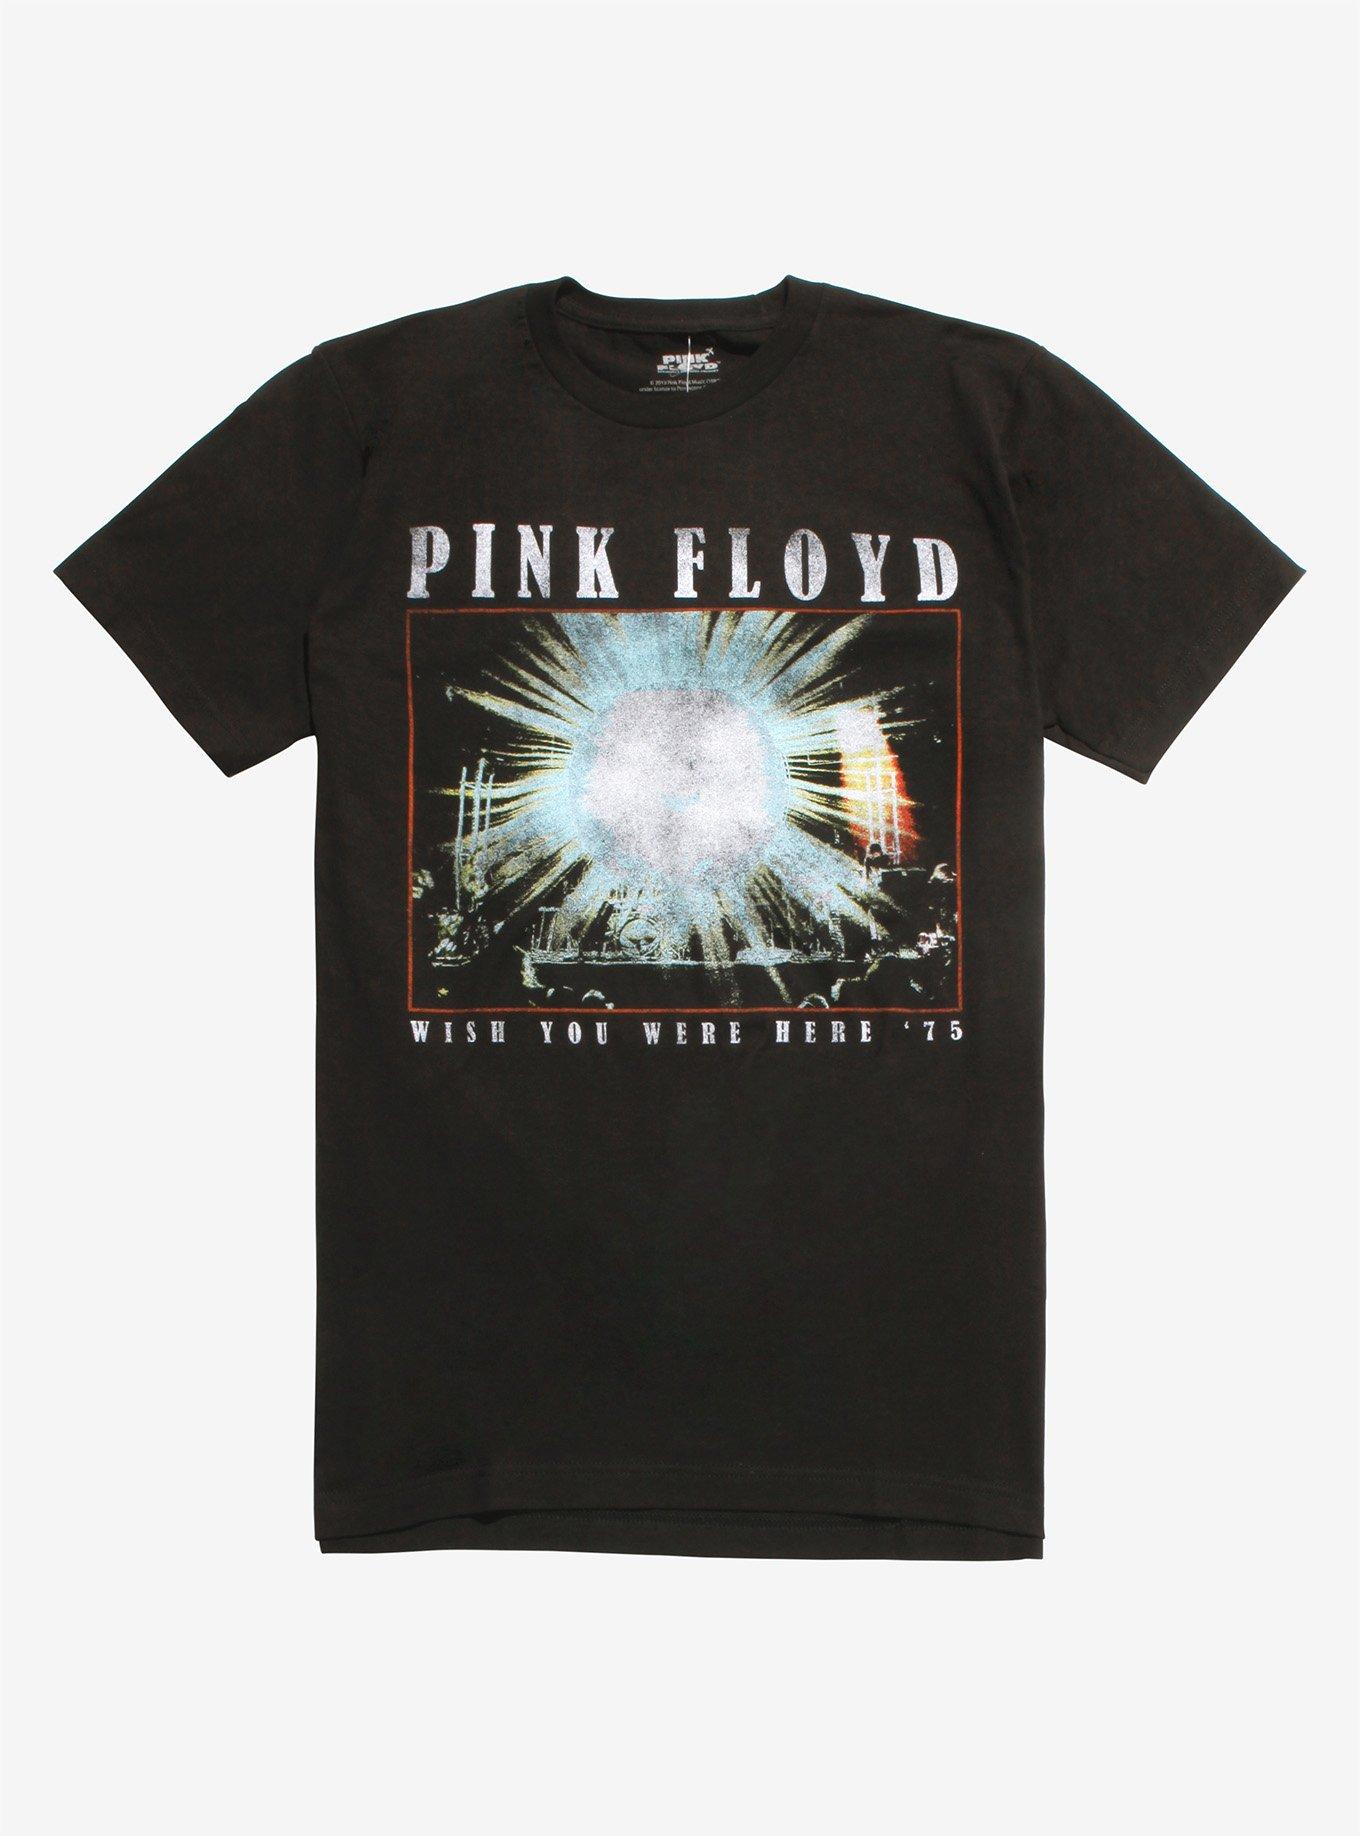 Pink Floyd Wish You Were Here '75 Tour T-Shirt | Hot Topic